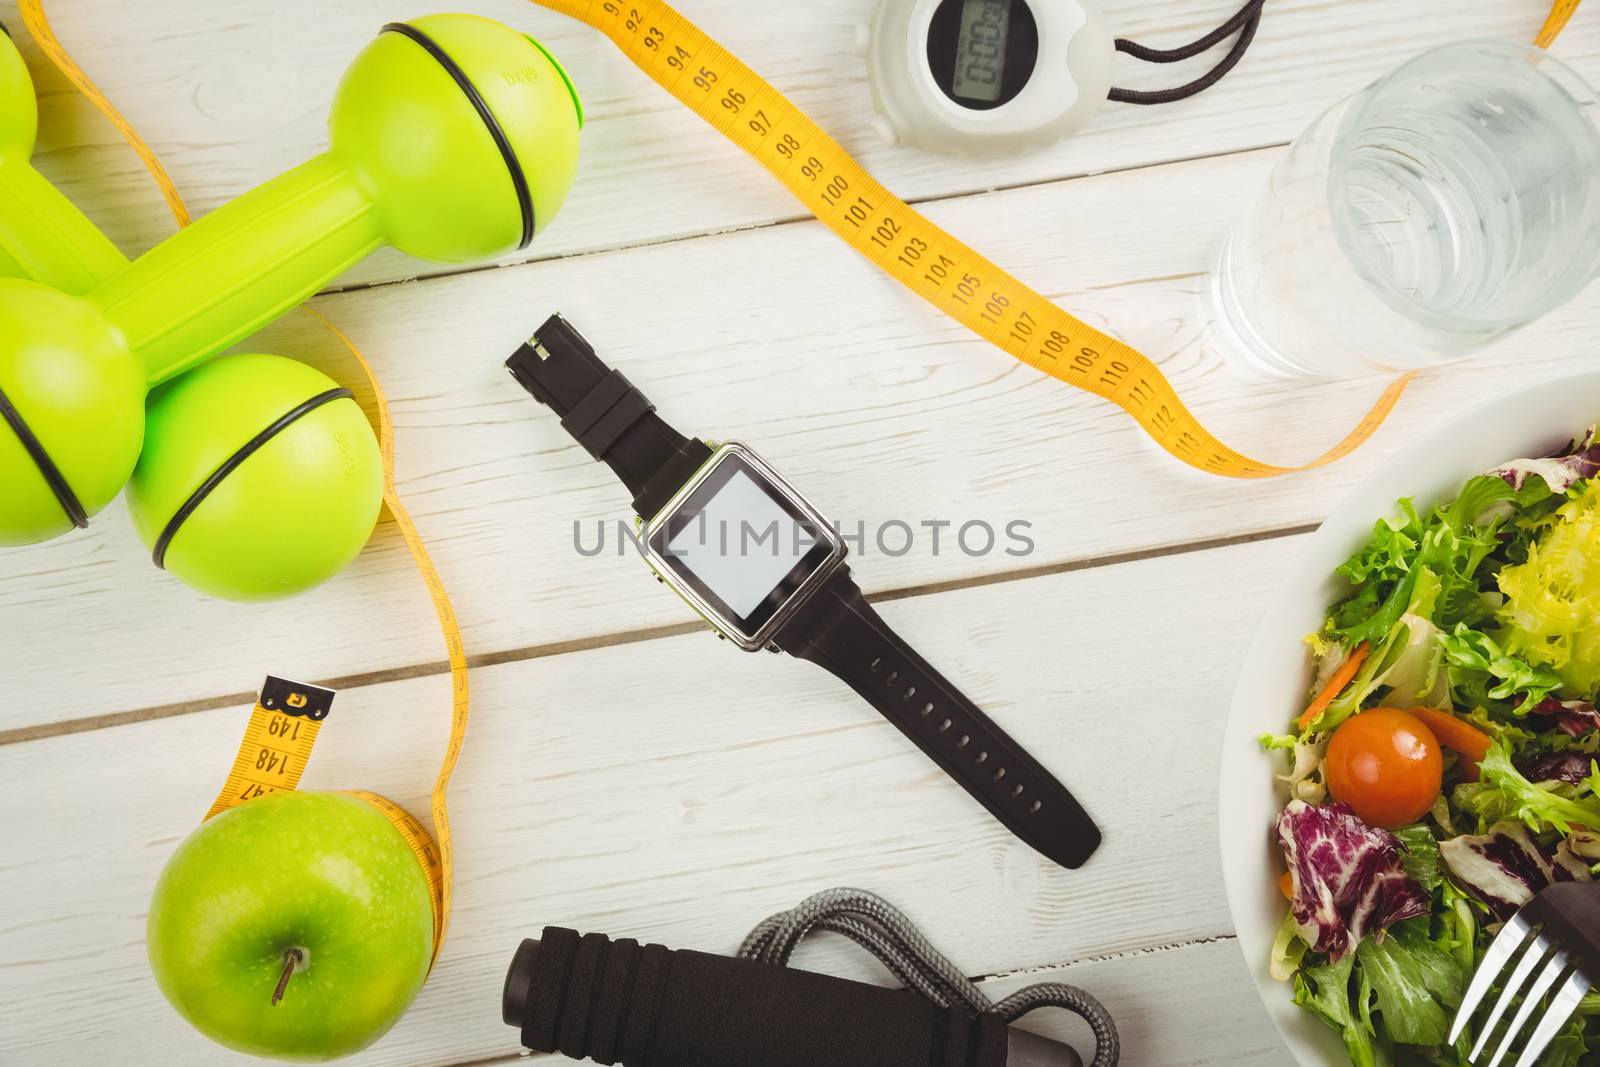 Watch with indicators of healthy lifestyle on wooden table